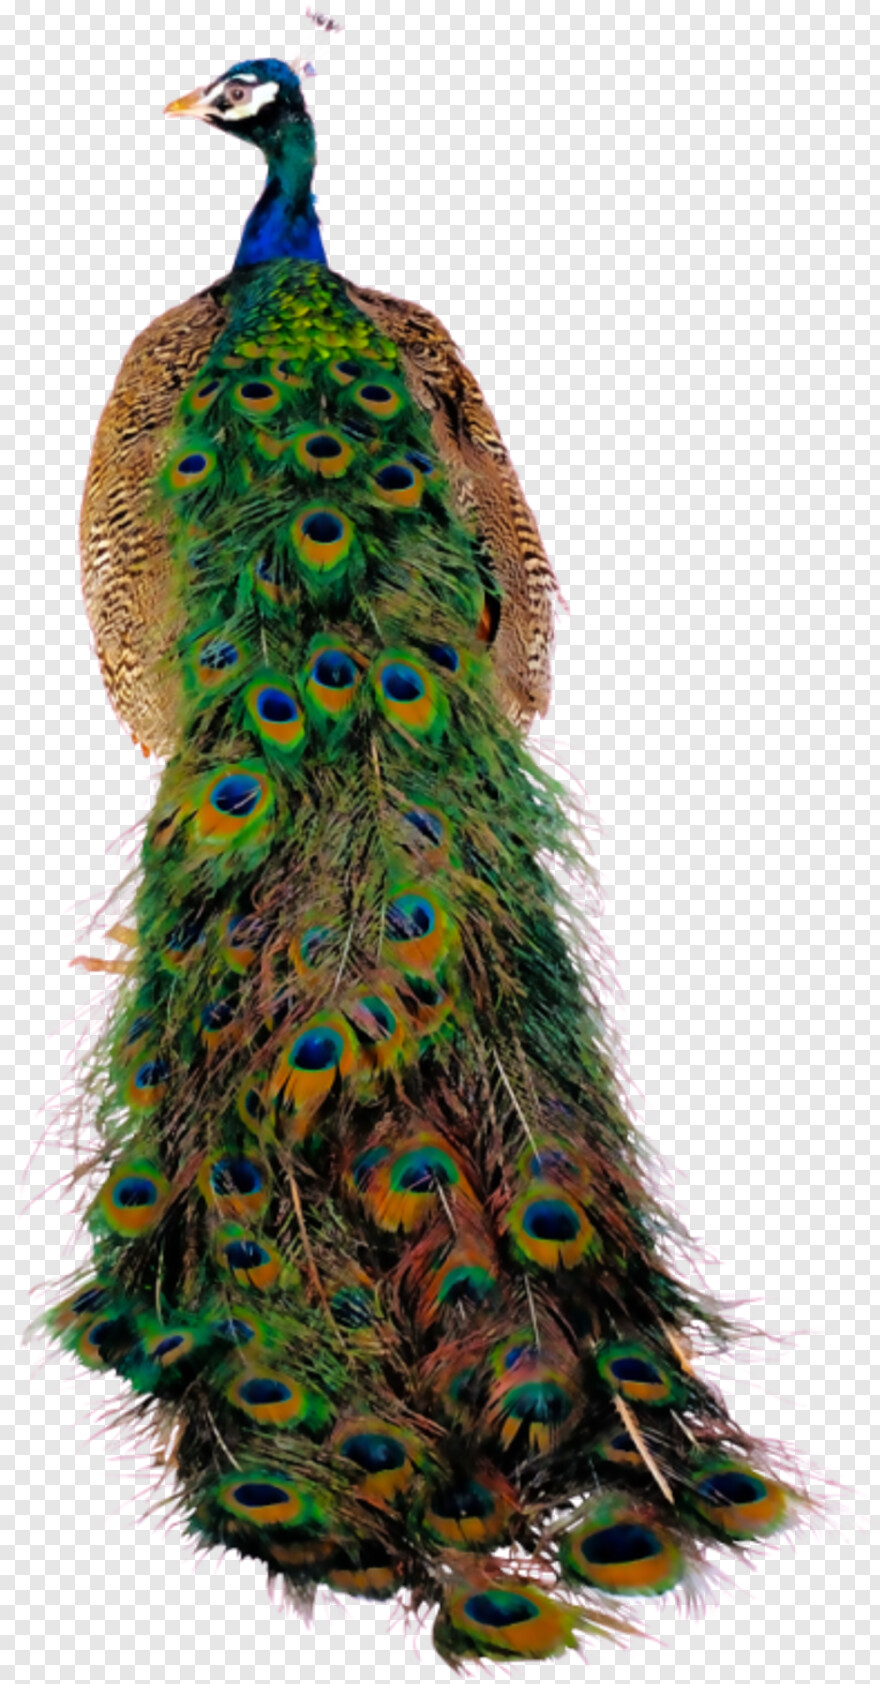 peacock-feather # 360241